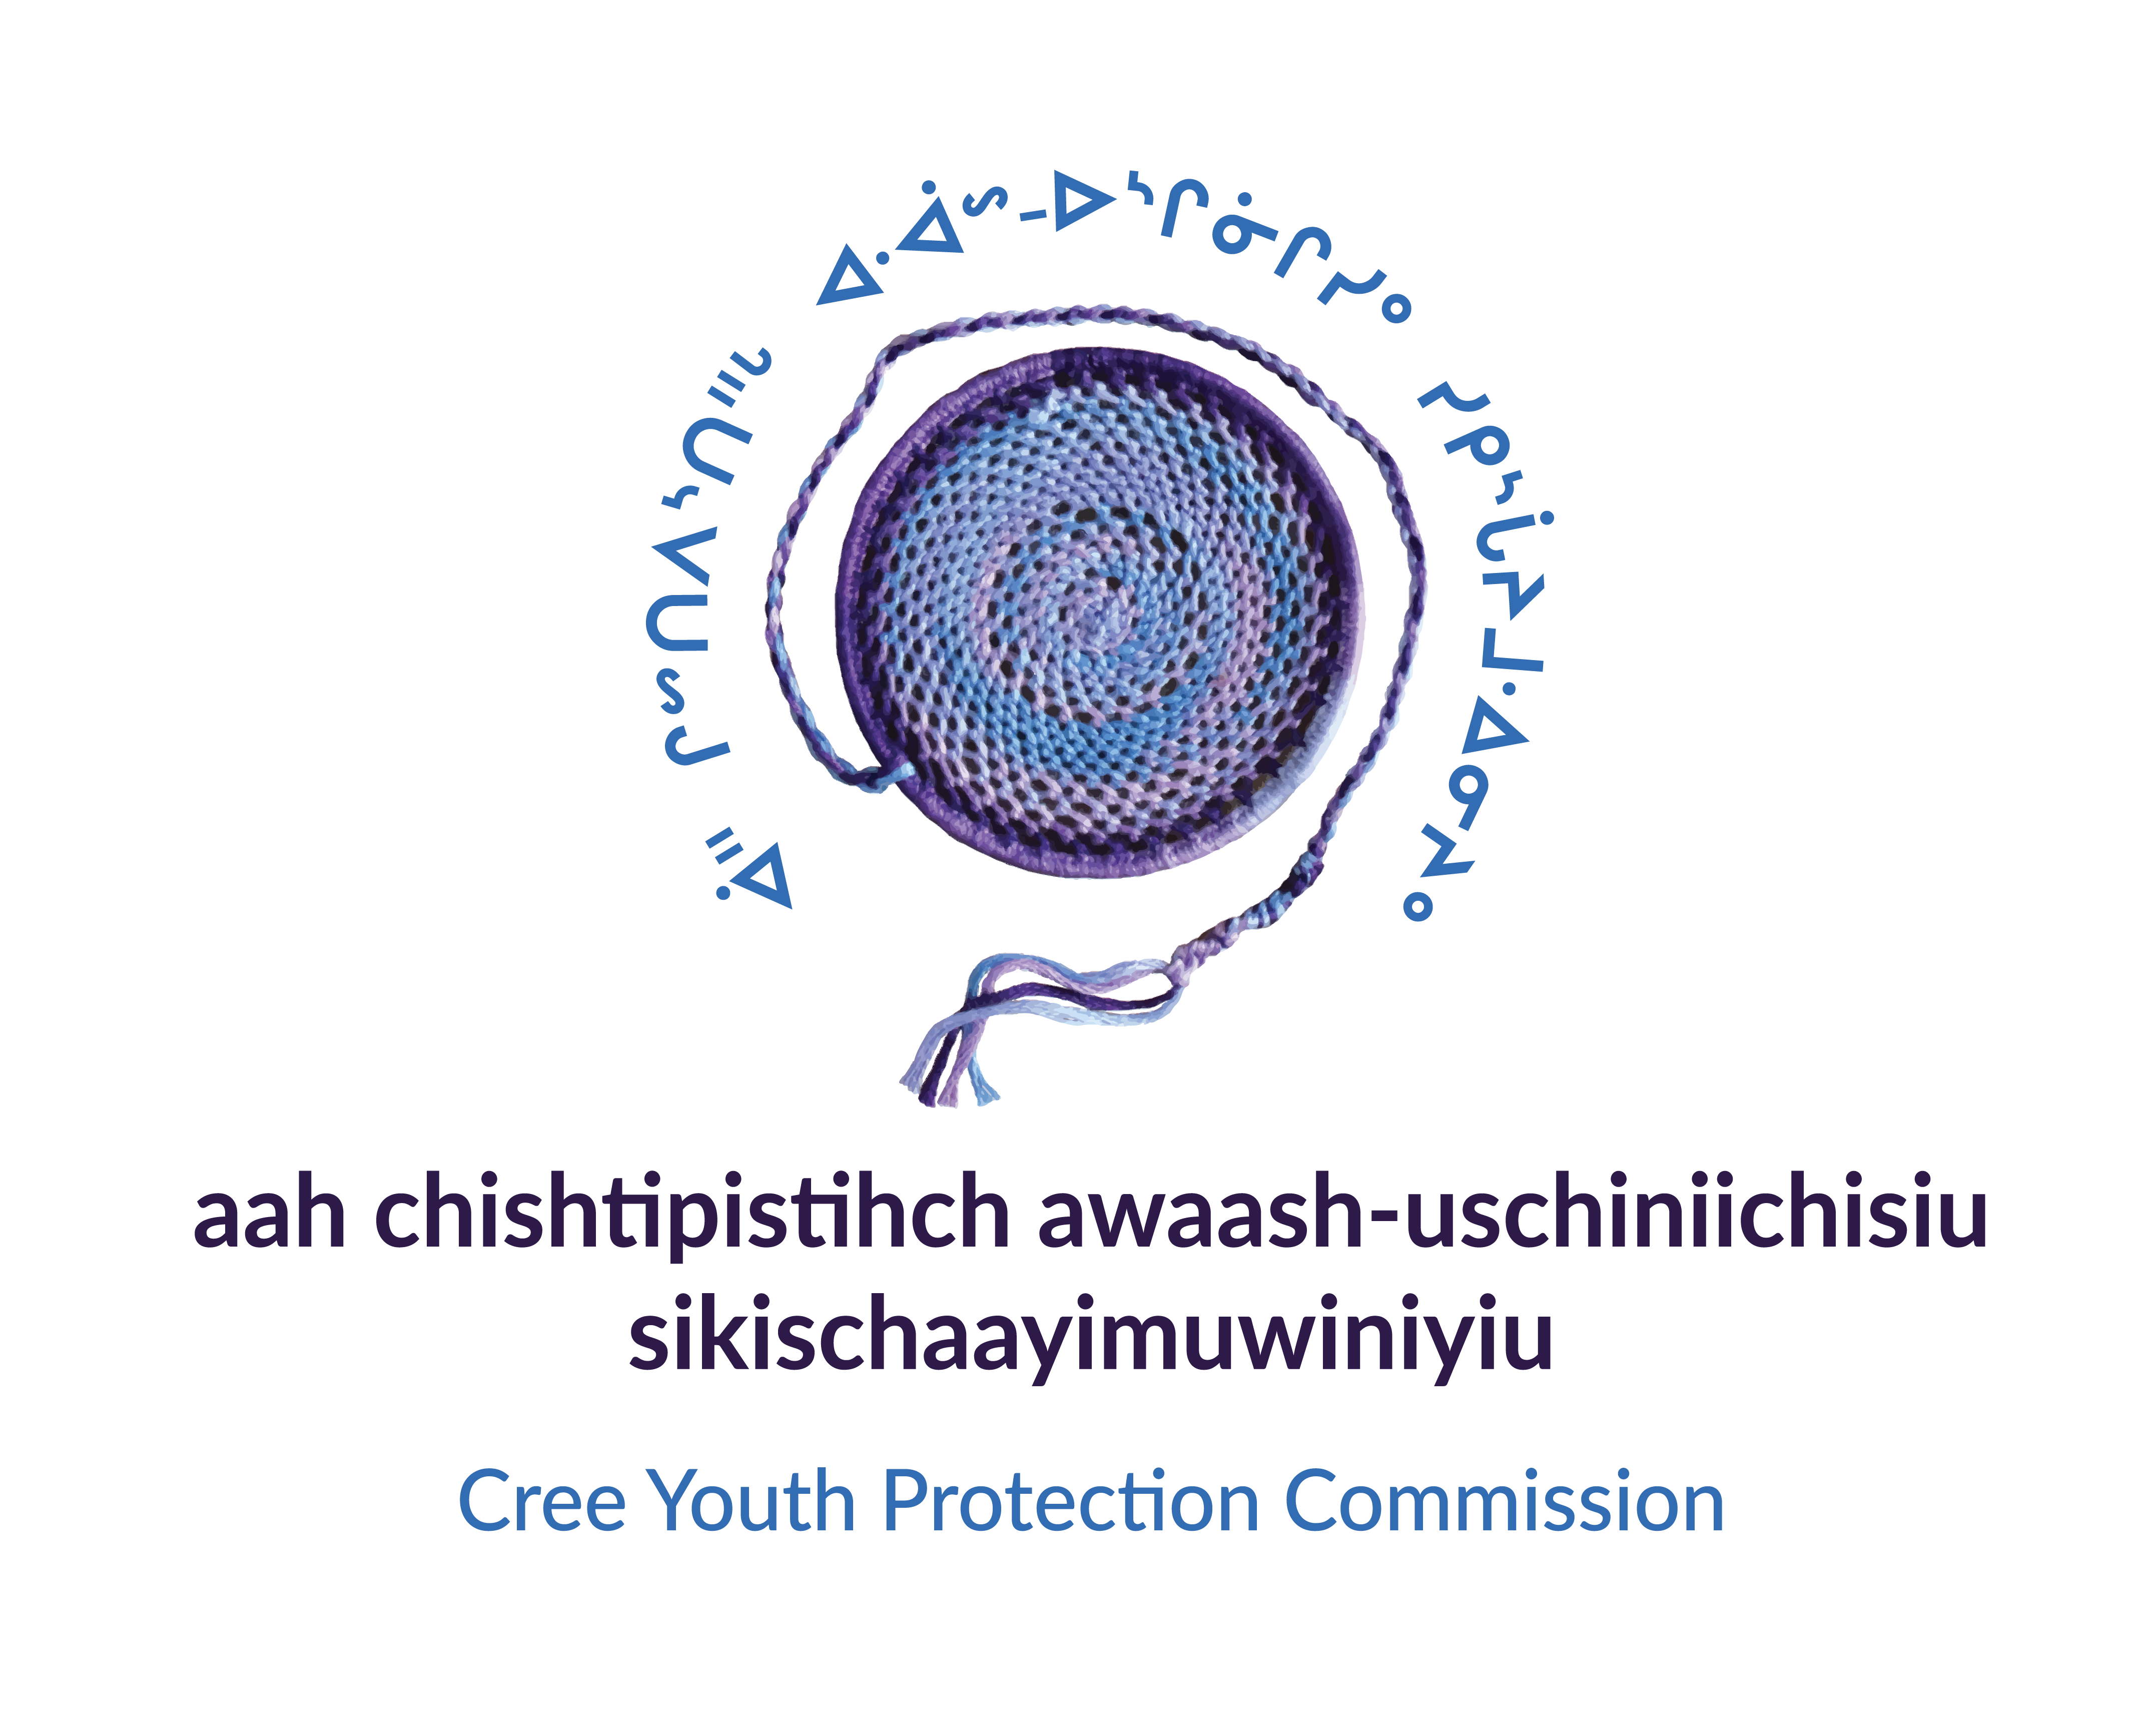 Cree Youth Protection Commission